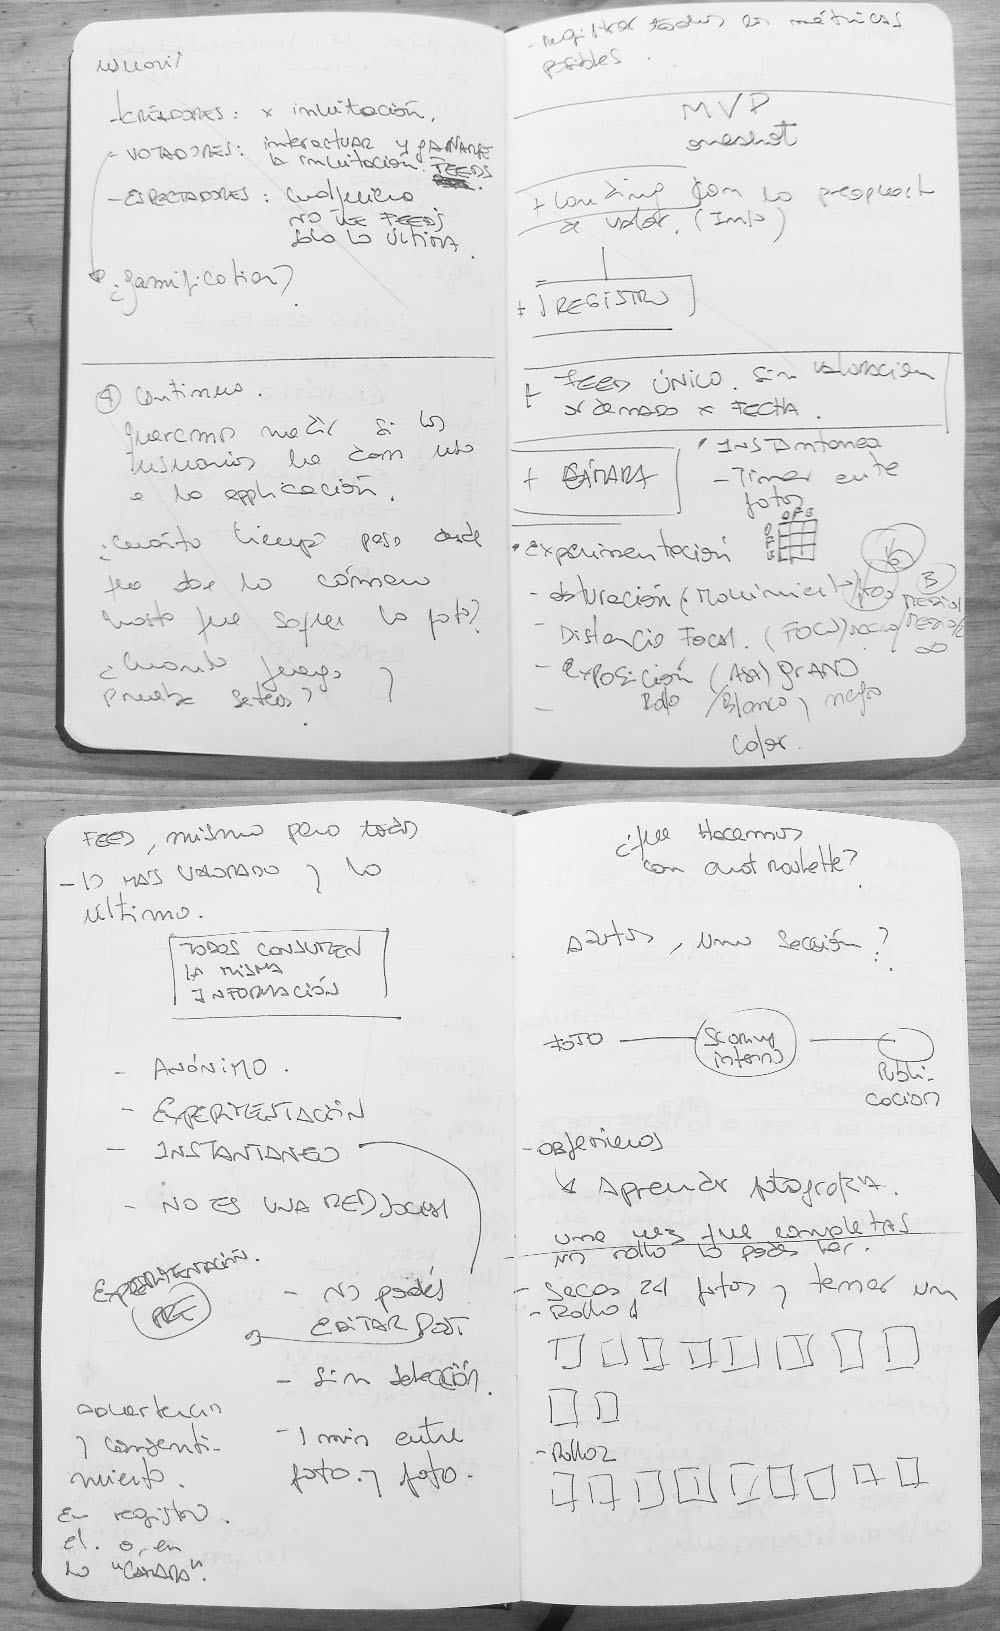 Notebooks with ideas for the oneshot app